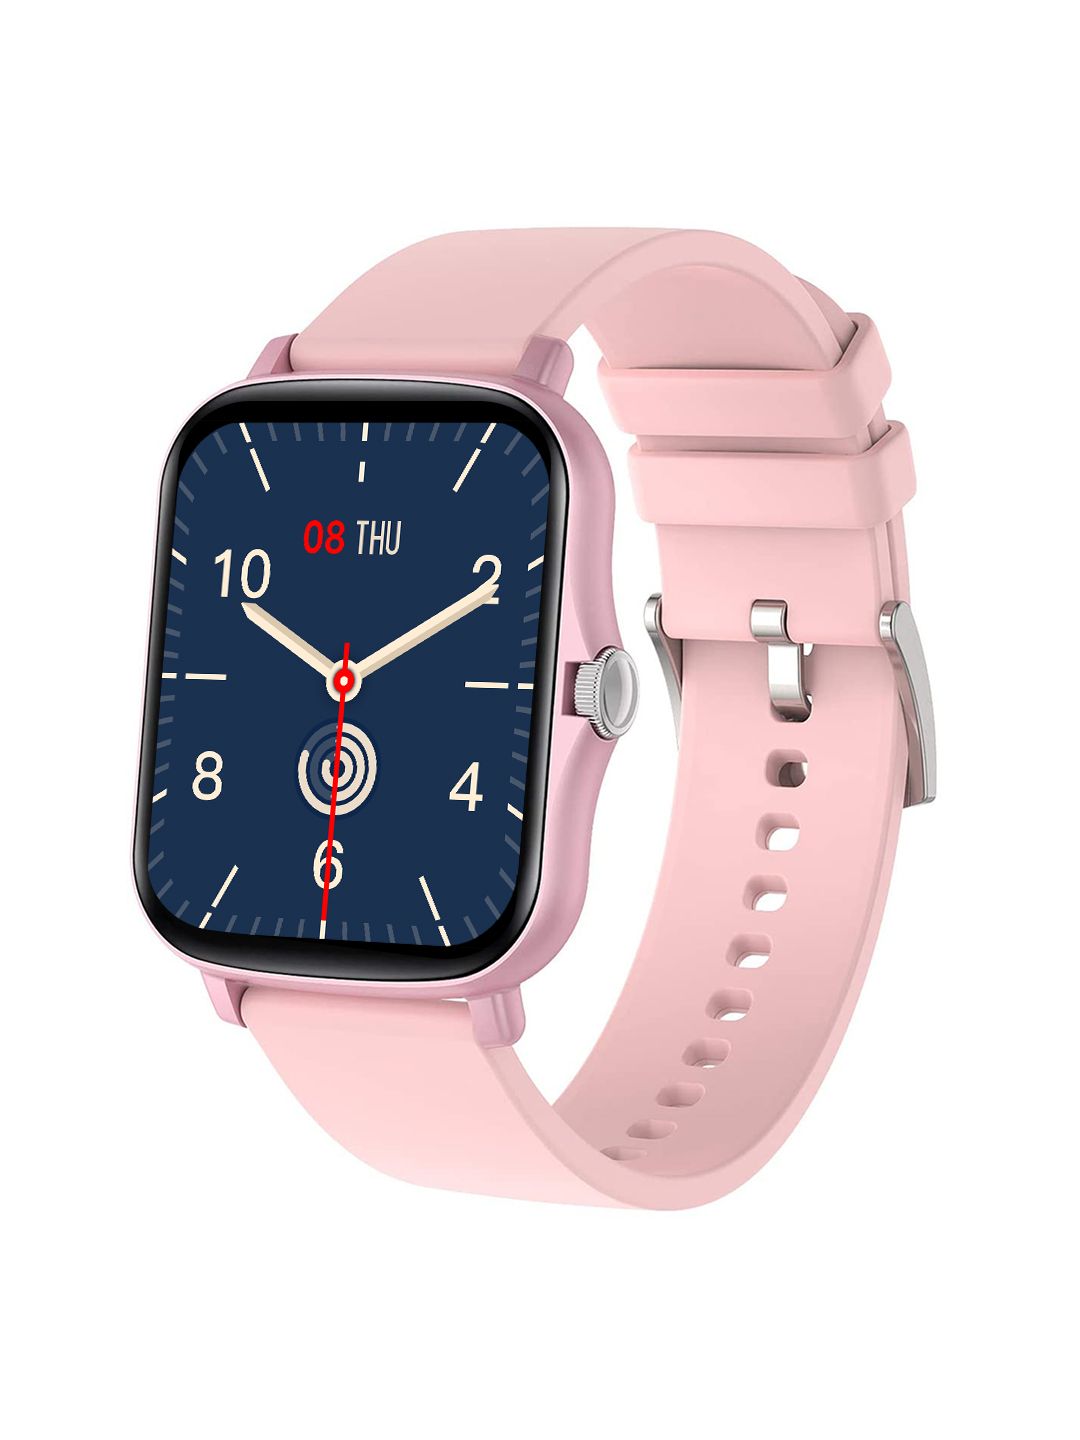 Fire-Boltt Beast Industry Largest Display 1.69" Smartwatch - Pink 02BSWAAY Price in India